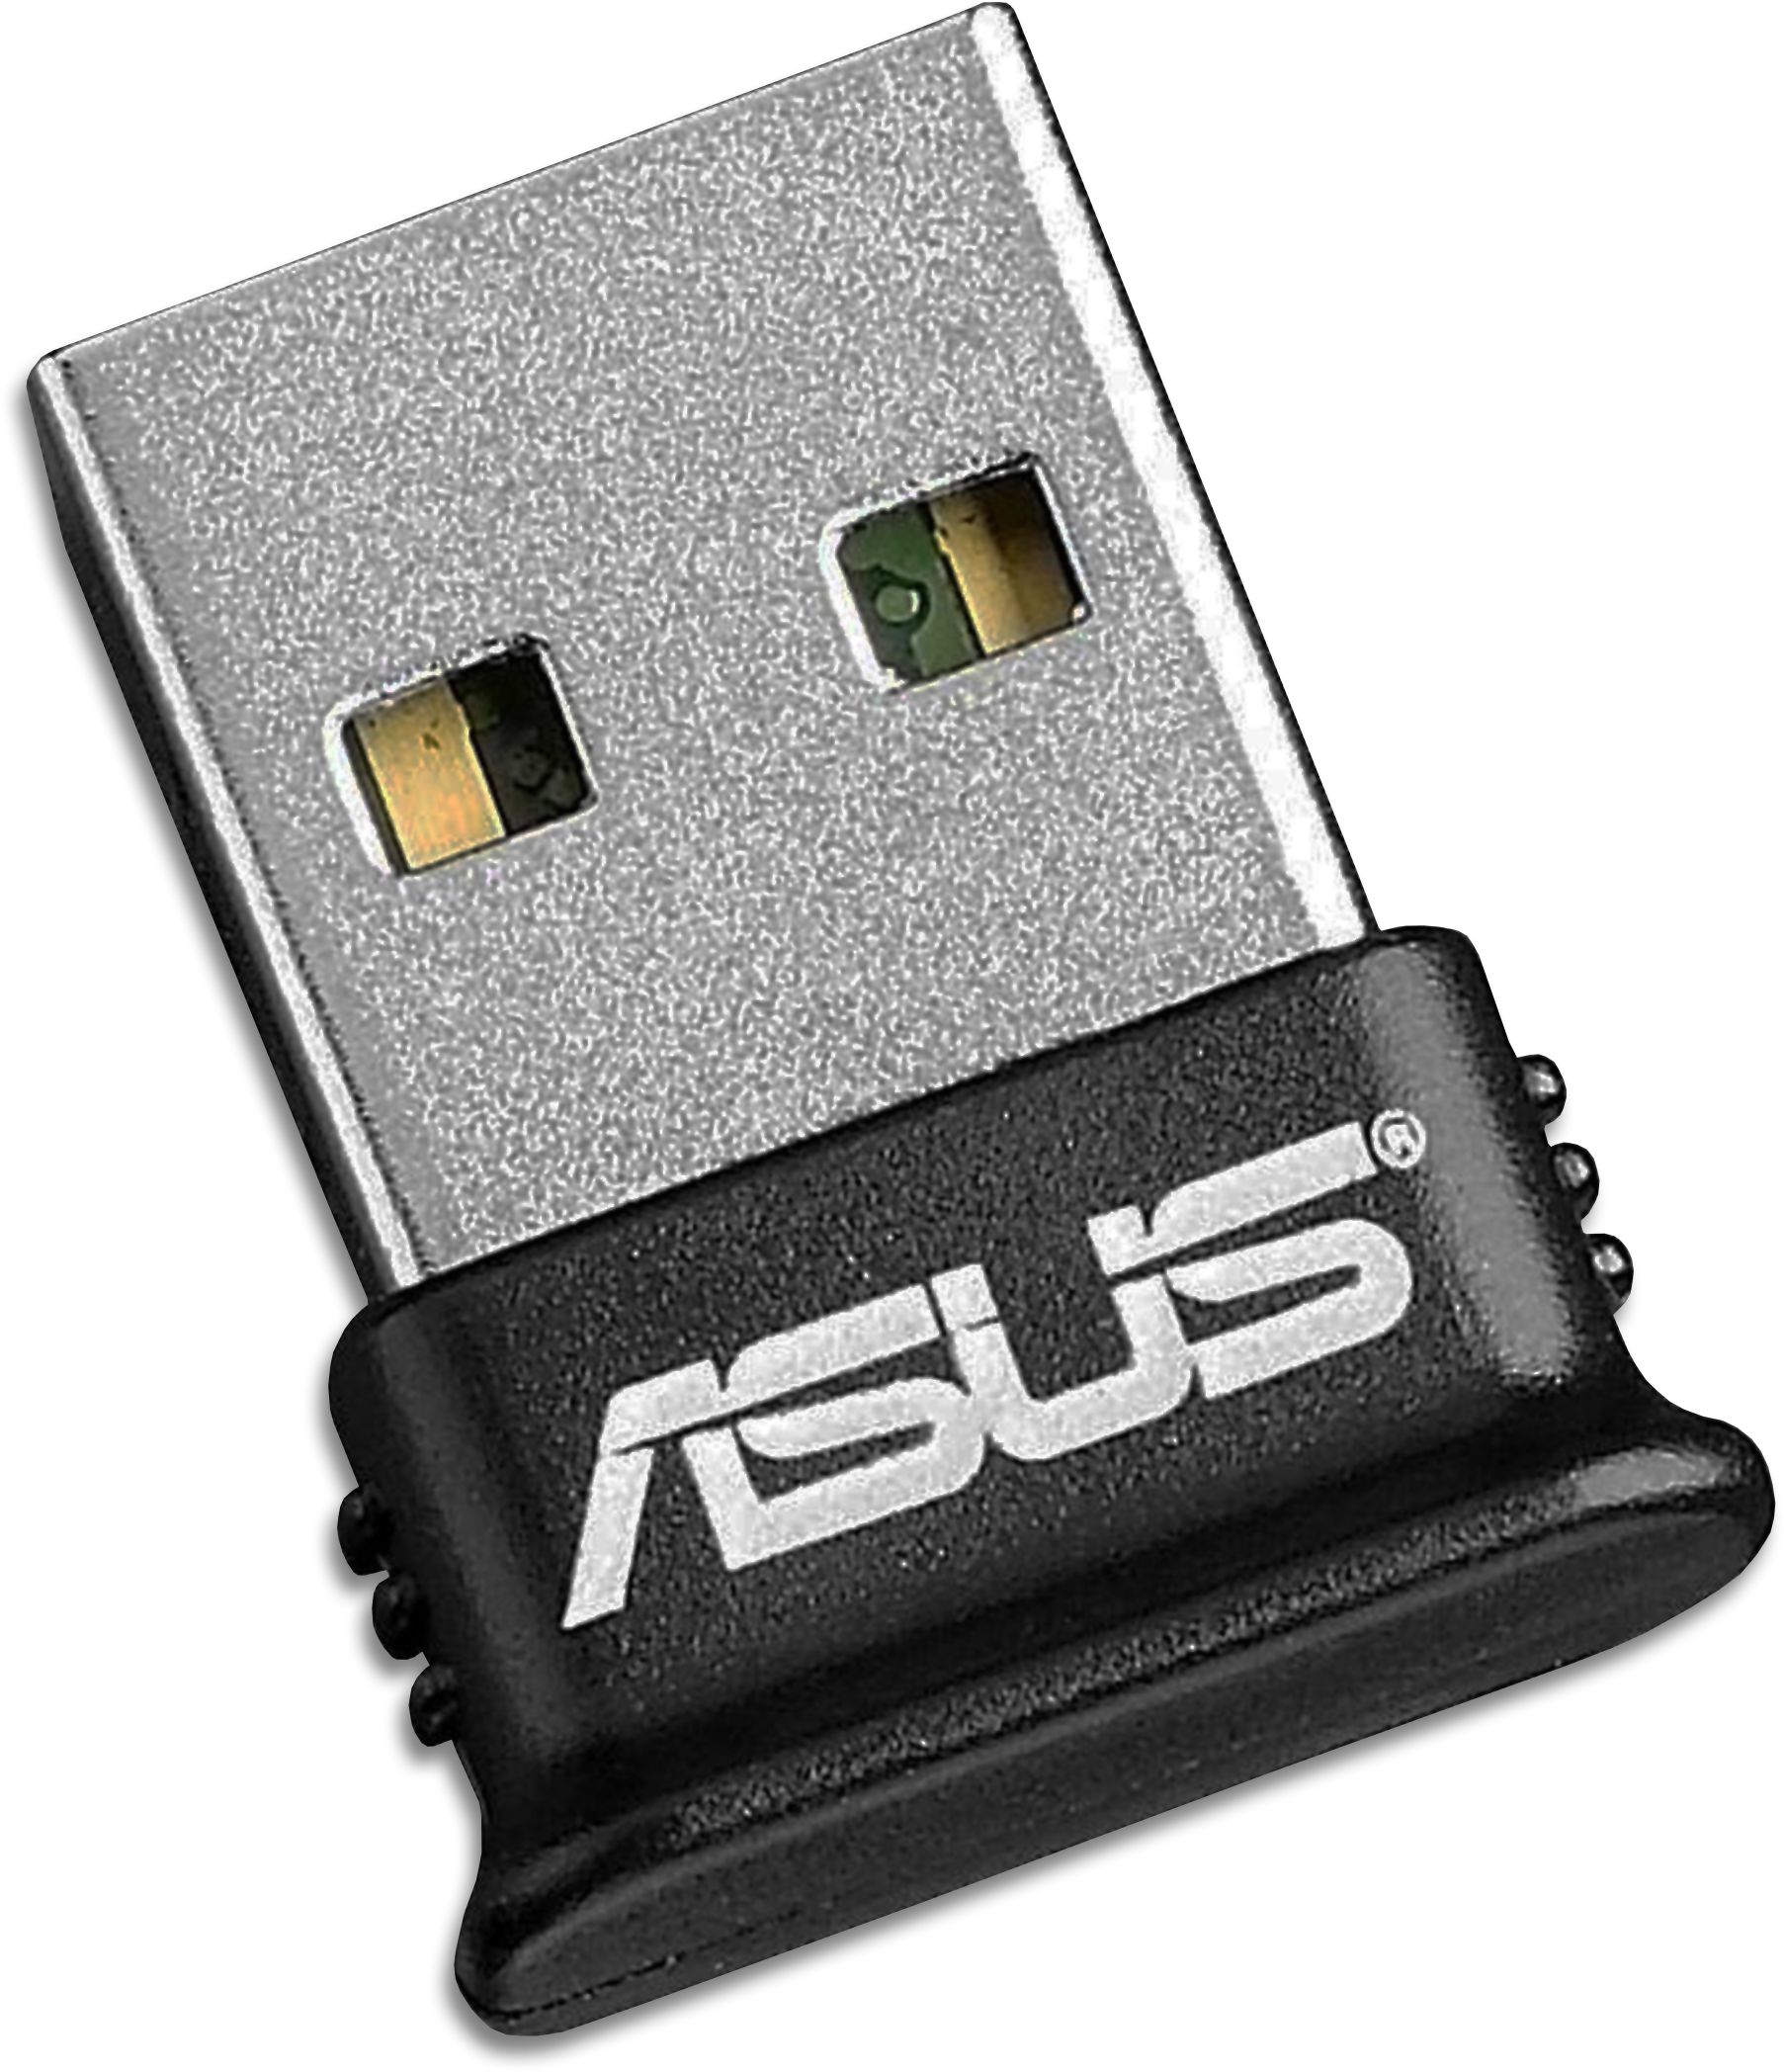 how to connect a asus usb bt400 to a lg sj7